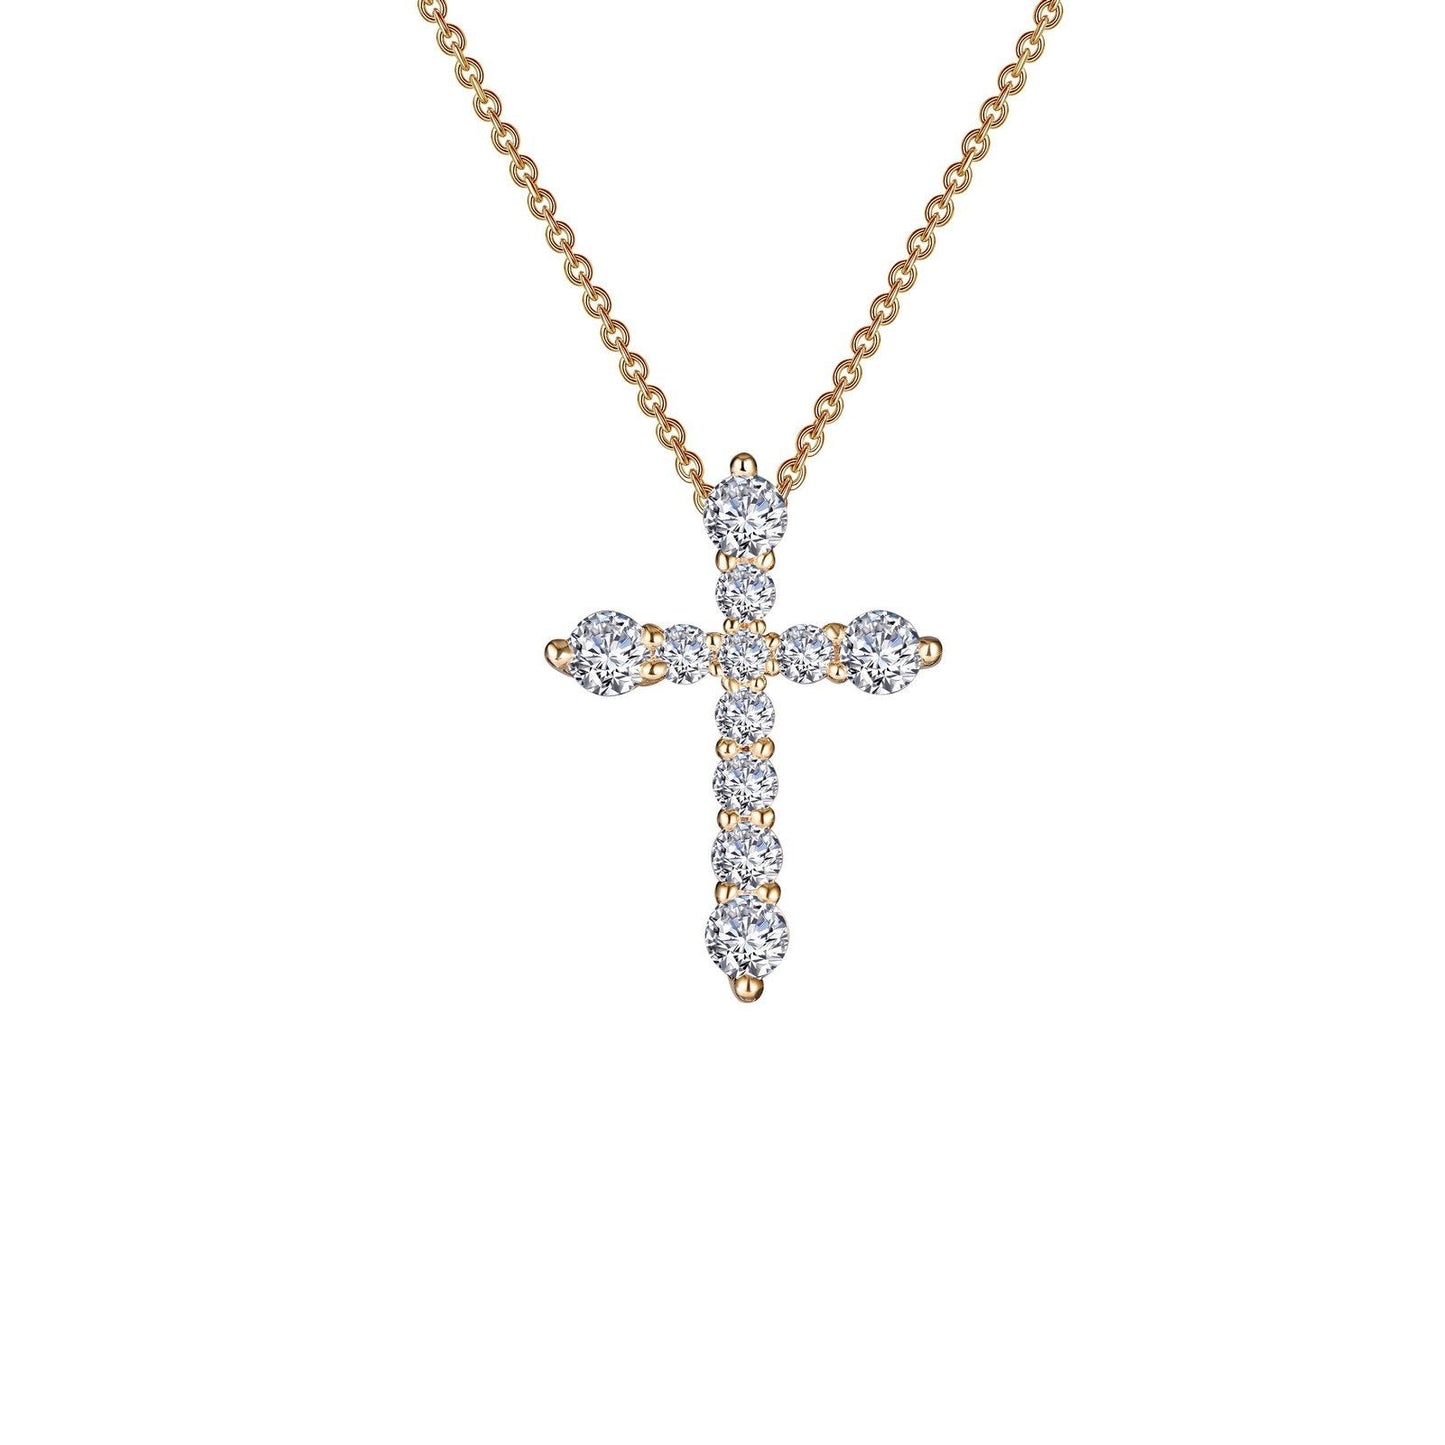 Lafonn 0.67 CTW Cross Pendant Necklace Simulated Diamond NECKLACES Gold 0.67 CTS Approx. 18.2mm(H) x13.4mm(W) 